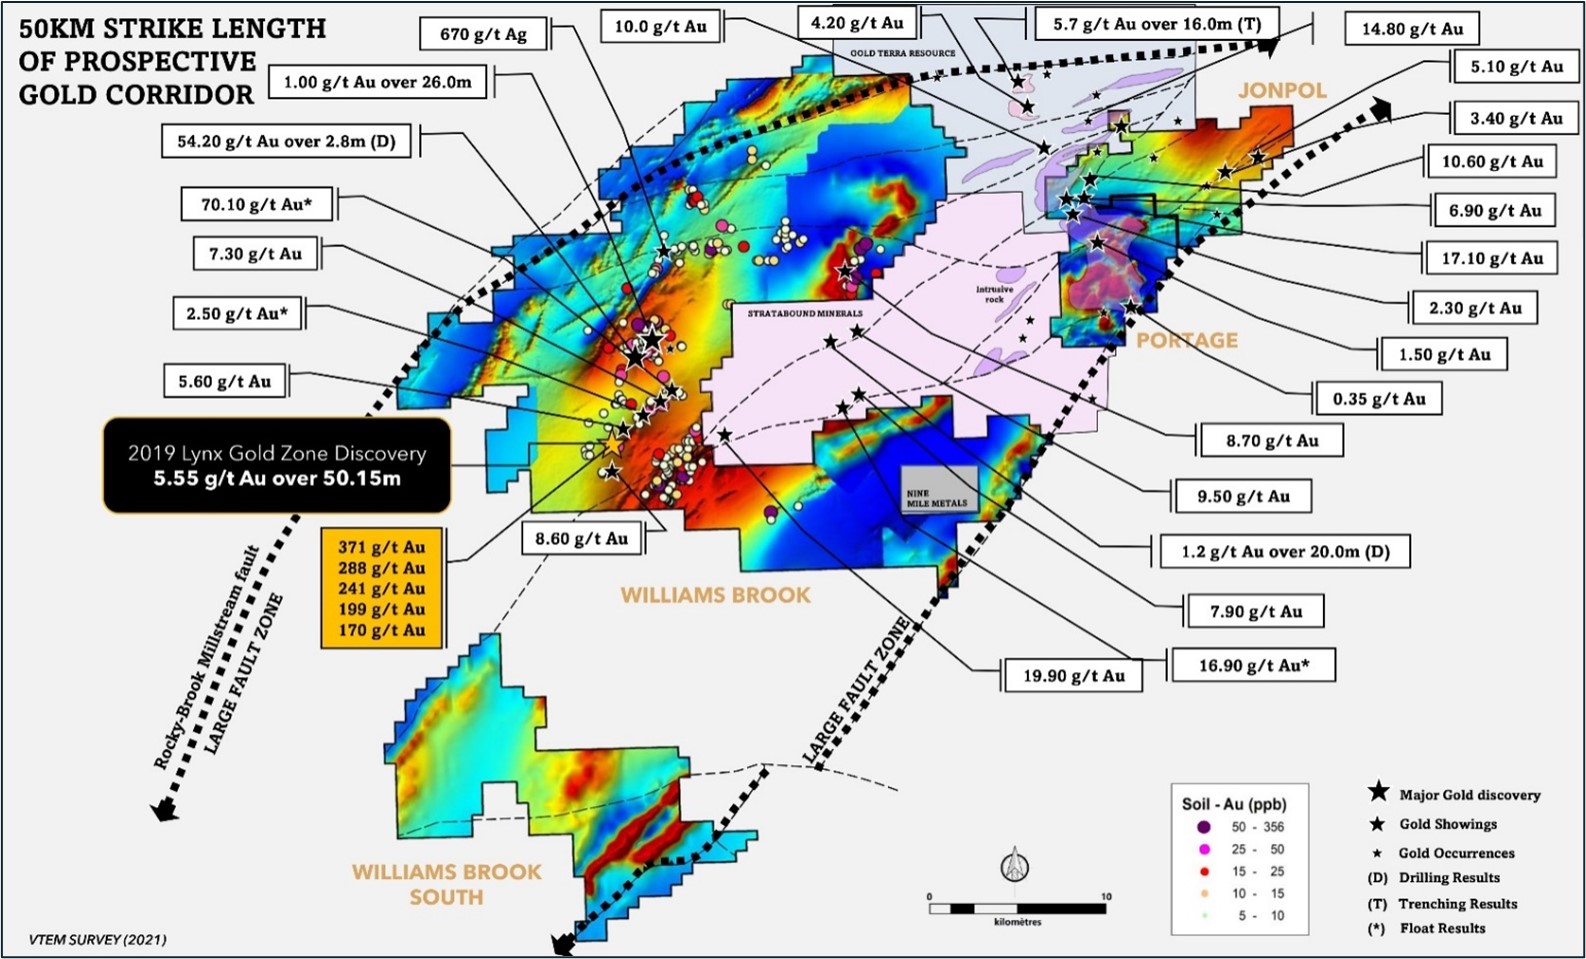 Figure 4. Main gold showings and occurrences at the Williams Brook Gold Project